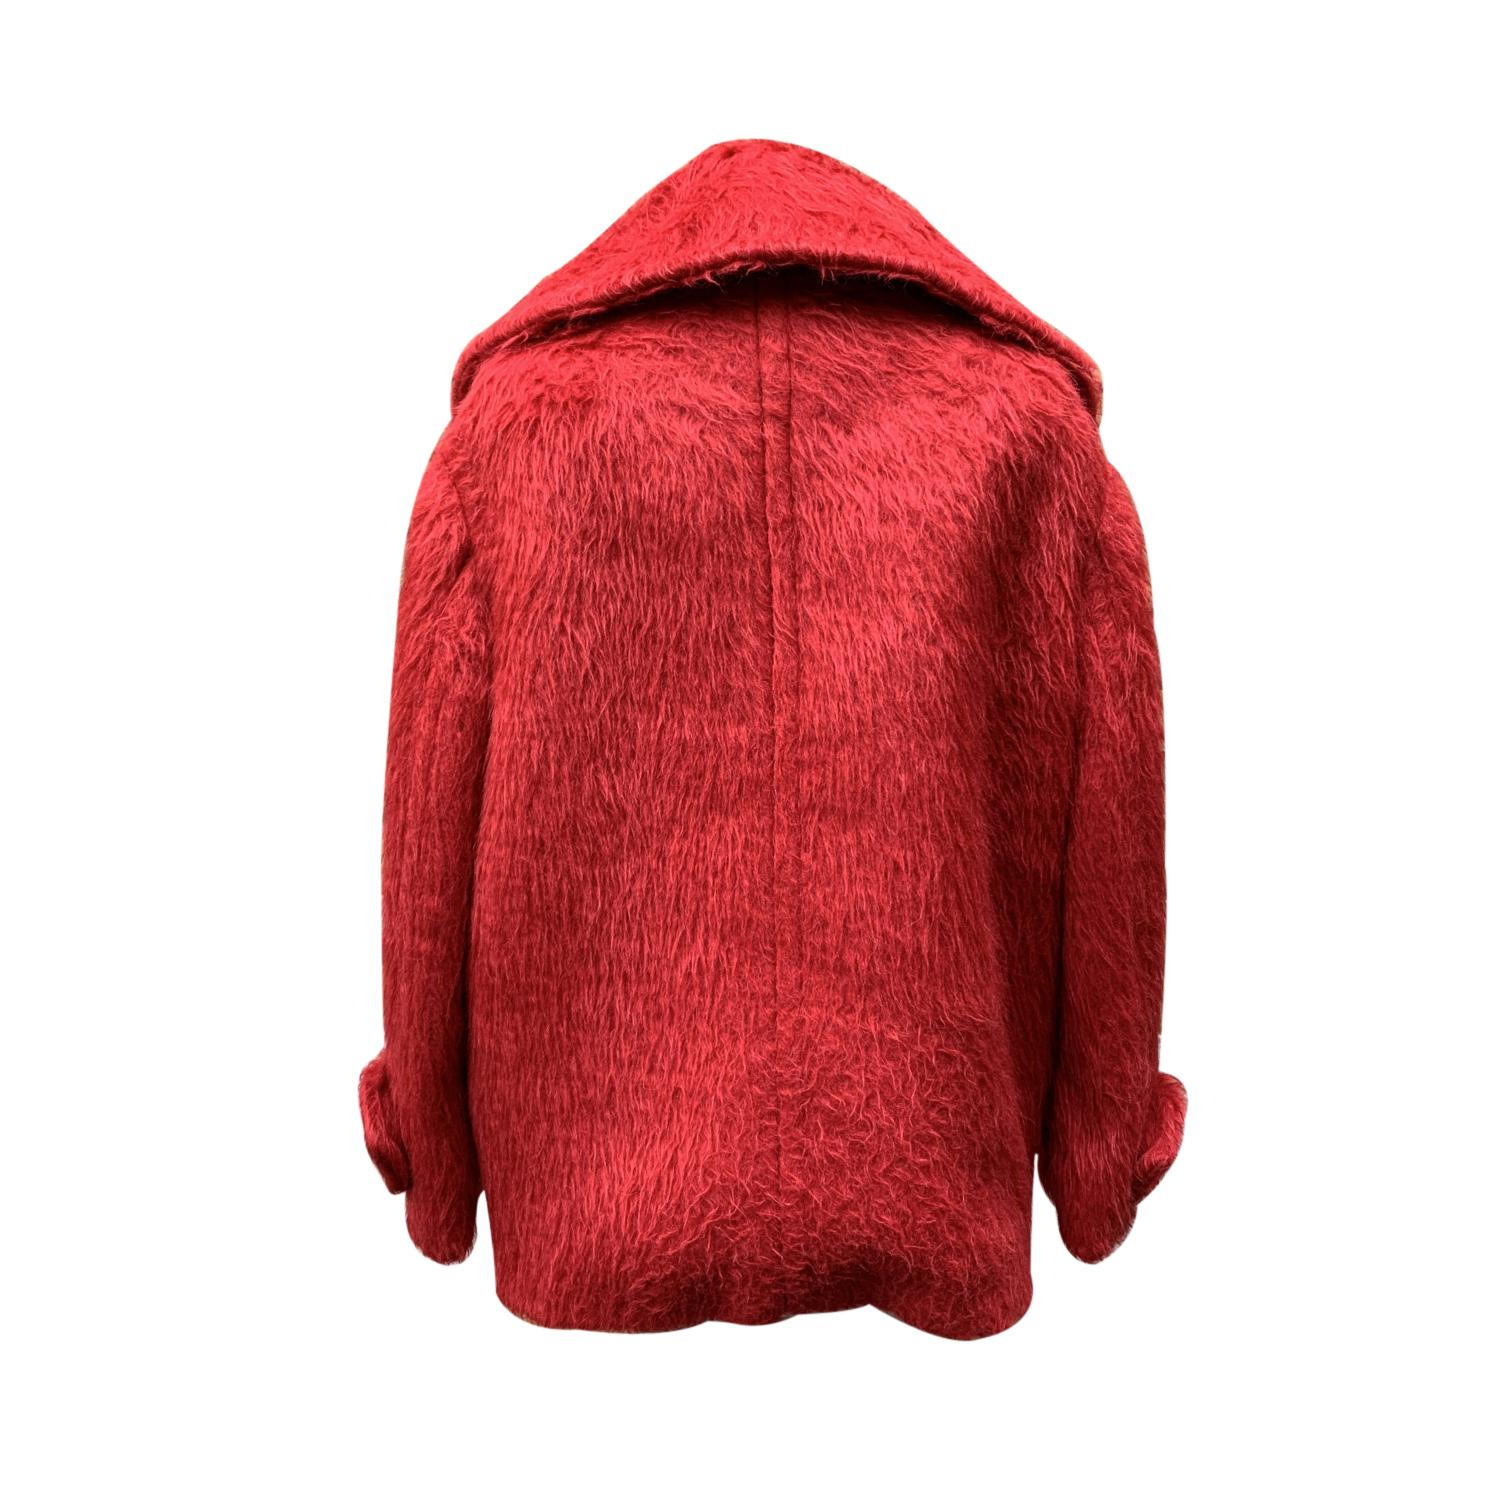 Prada red 'Fur Alpaca' women caban jacket. Long sleeve styling. Wide lapel collar. Front button closure. Extra button included. 2 pockets on the hips with flaps. Composition: 70% Alpaca, 30% Virgin wool. Lined. Made in Italy. Size 38 IT (it should